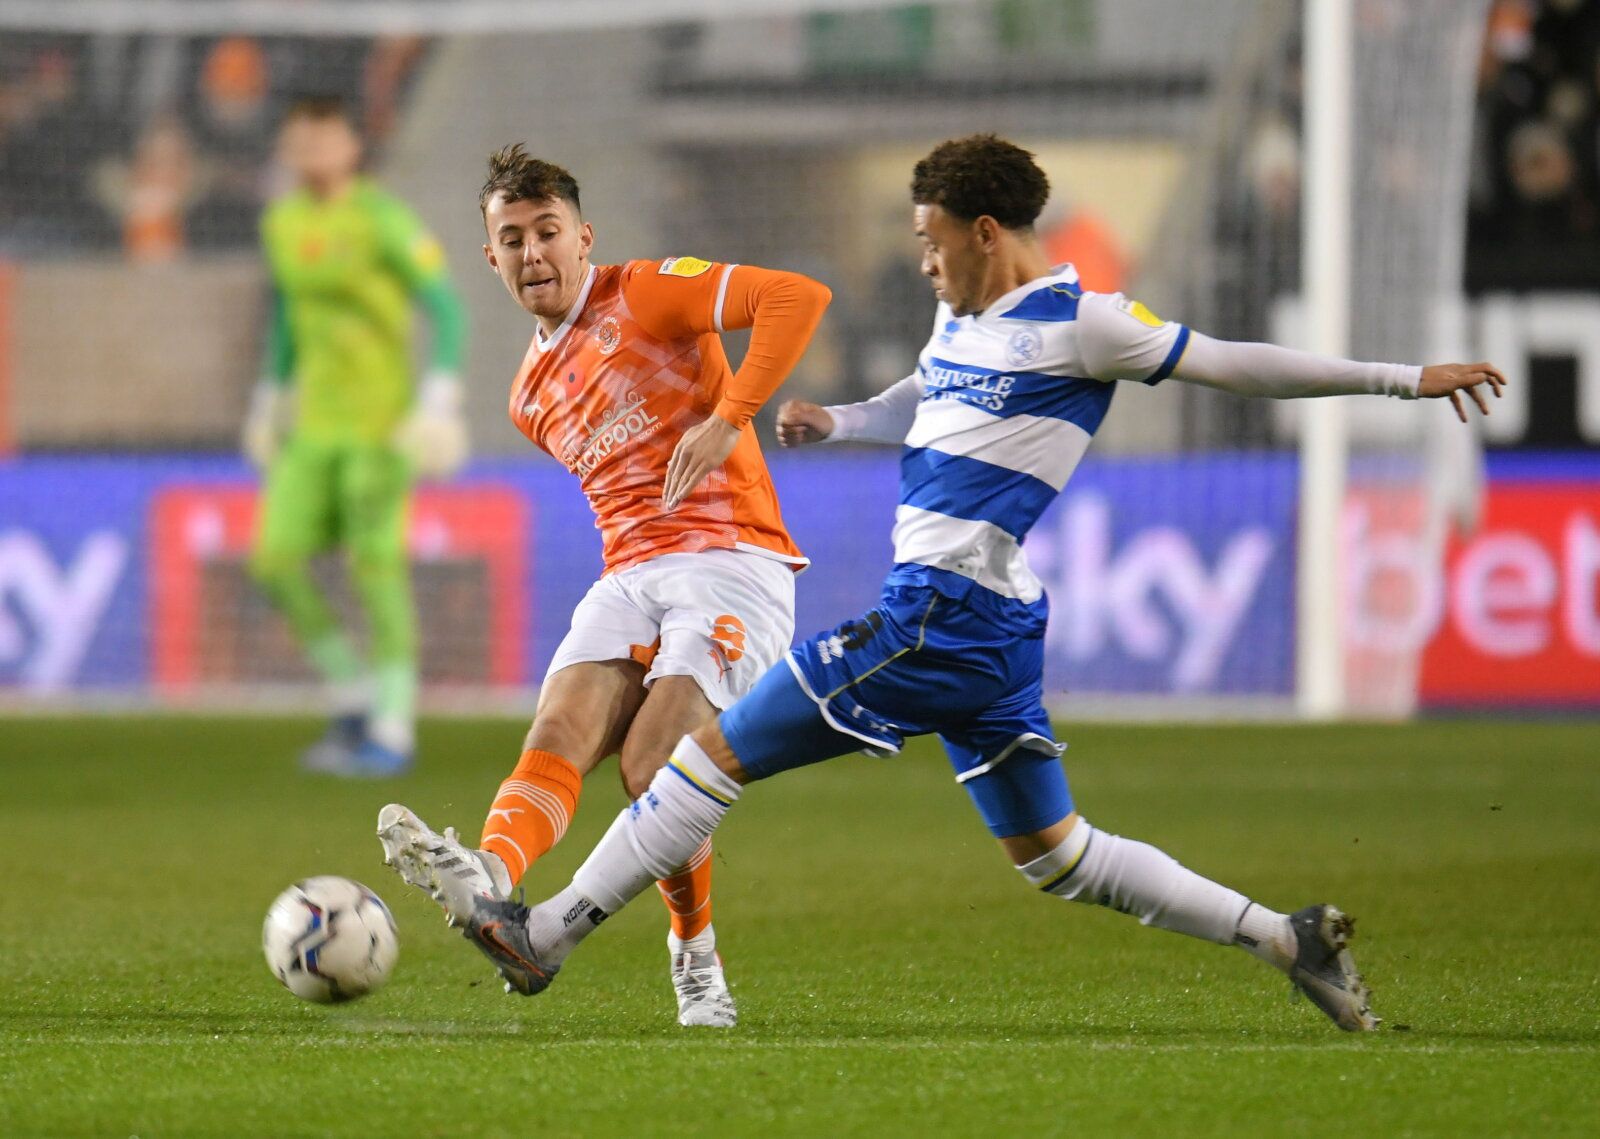 Soccer Football - Championship - Blackpool v Queens Park Rangers - Bloomfield Road, Blackpool, Britain - November 6, 2021 Blackpool's Ryan Wintle in action with QPR's Luke Amos  Action Images/Paul Burrows  EDITORIAL USE ONLY. No use with unauthorized audio, video, data, fixture lists, club/league logos or "live" services. Online in-match use limited to 75 images, no video emulation. No use in betting, games or single club/league/player publications.  Please contact your account representative fo